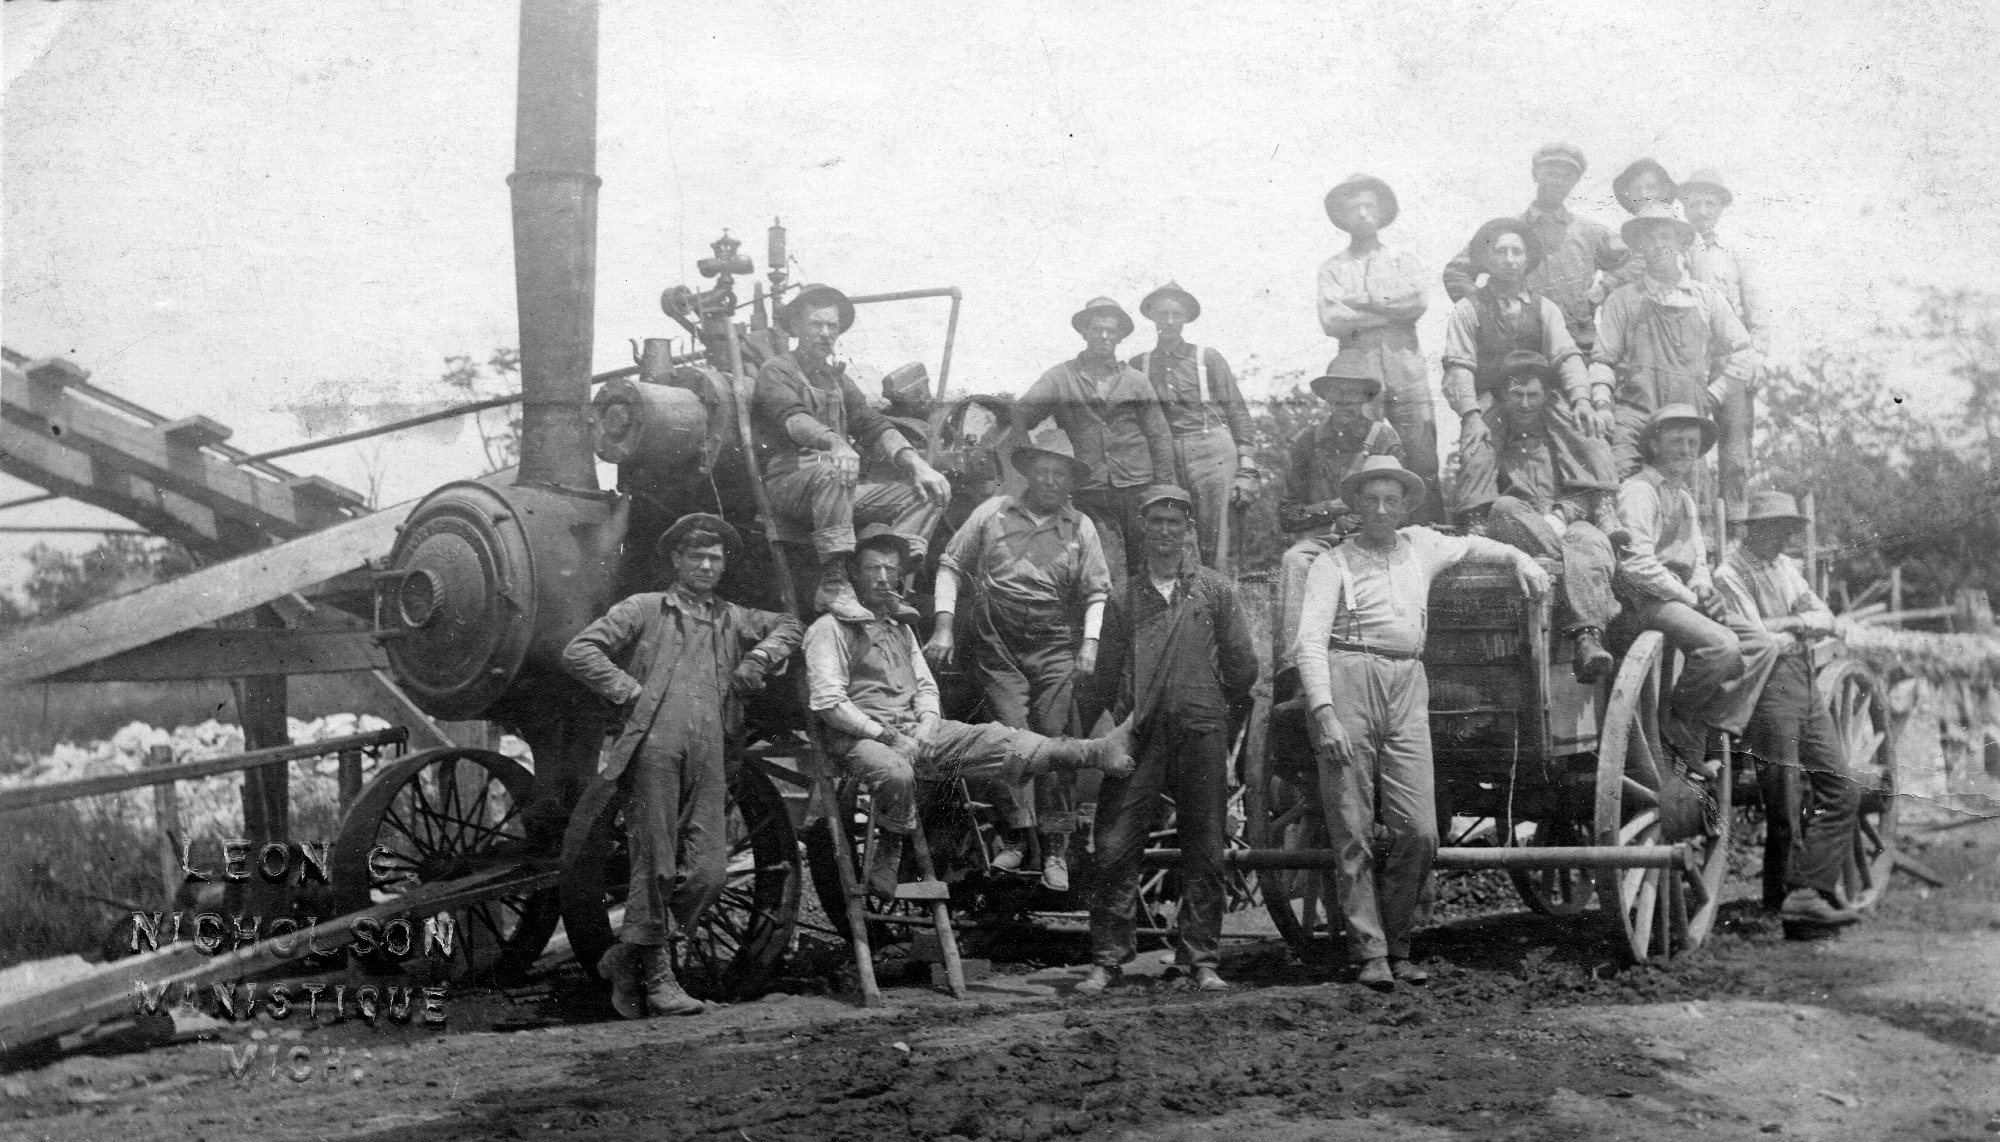 Circa 1902 Photo of employees of the White Marble Lime Company (Leon Nicholson Collection)